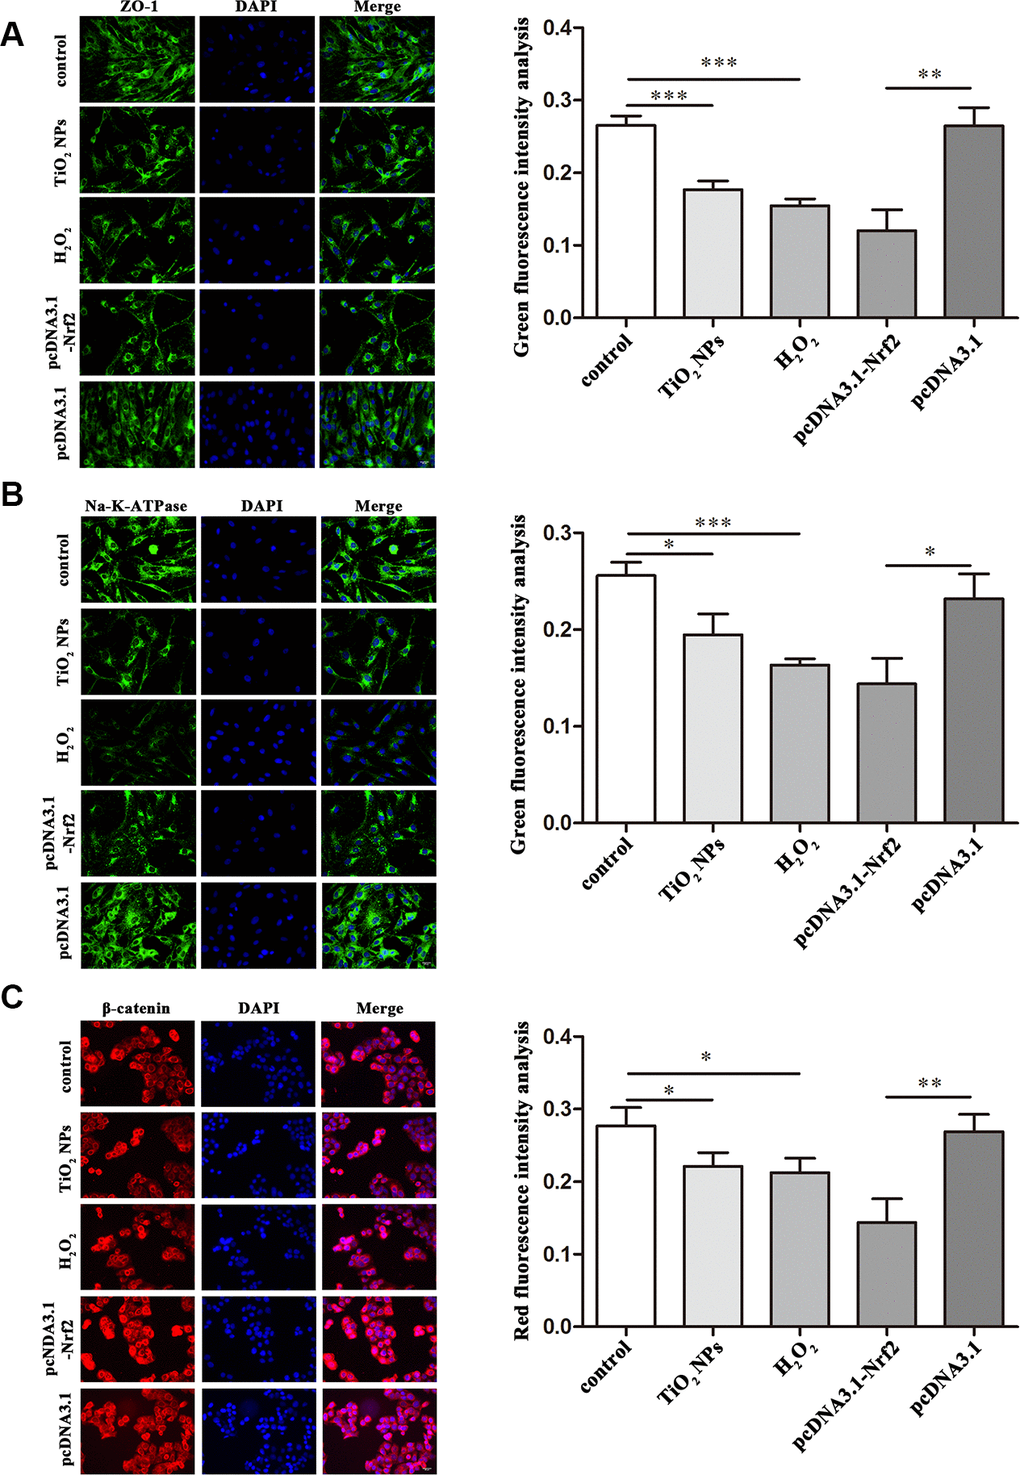 Regulation of functional proteins by TiO2 NPs in corneal endothelial cells. Immunofluorescence analysis of the expression of ZO-1 (A), Na-K-ATPase (B) and β-catenin (C) in primary corneal endothelial cells with TiO2 NPs treatment, H2O2 treatment or Nrf2 overexpression. bar = 20 μm. *P